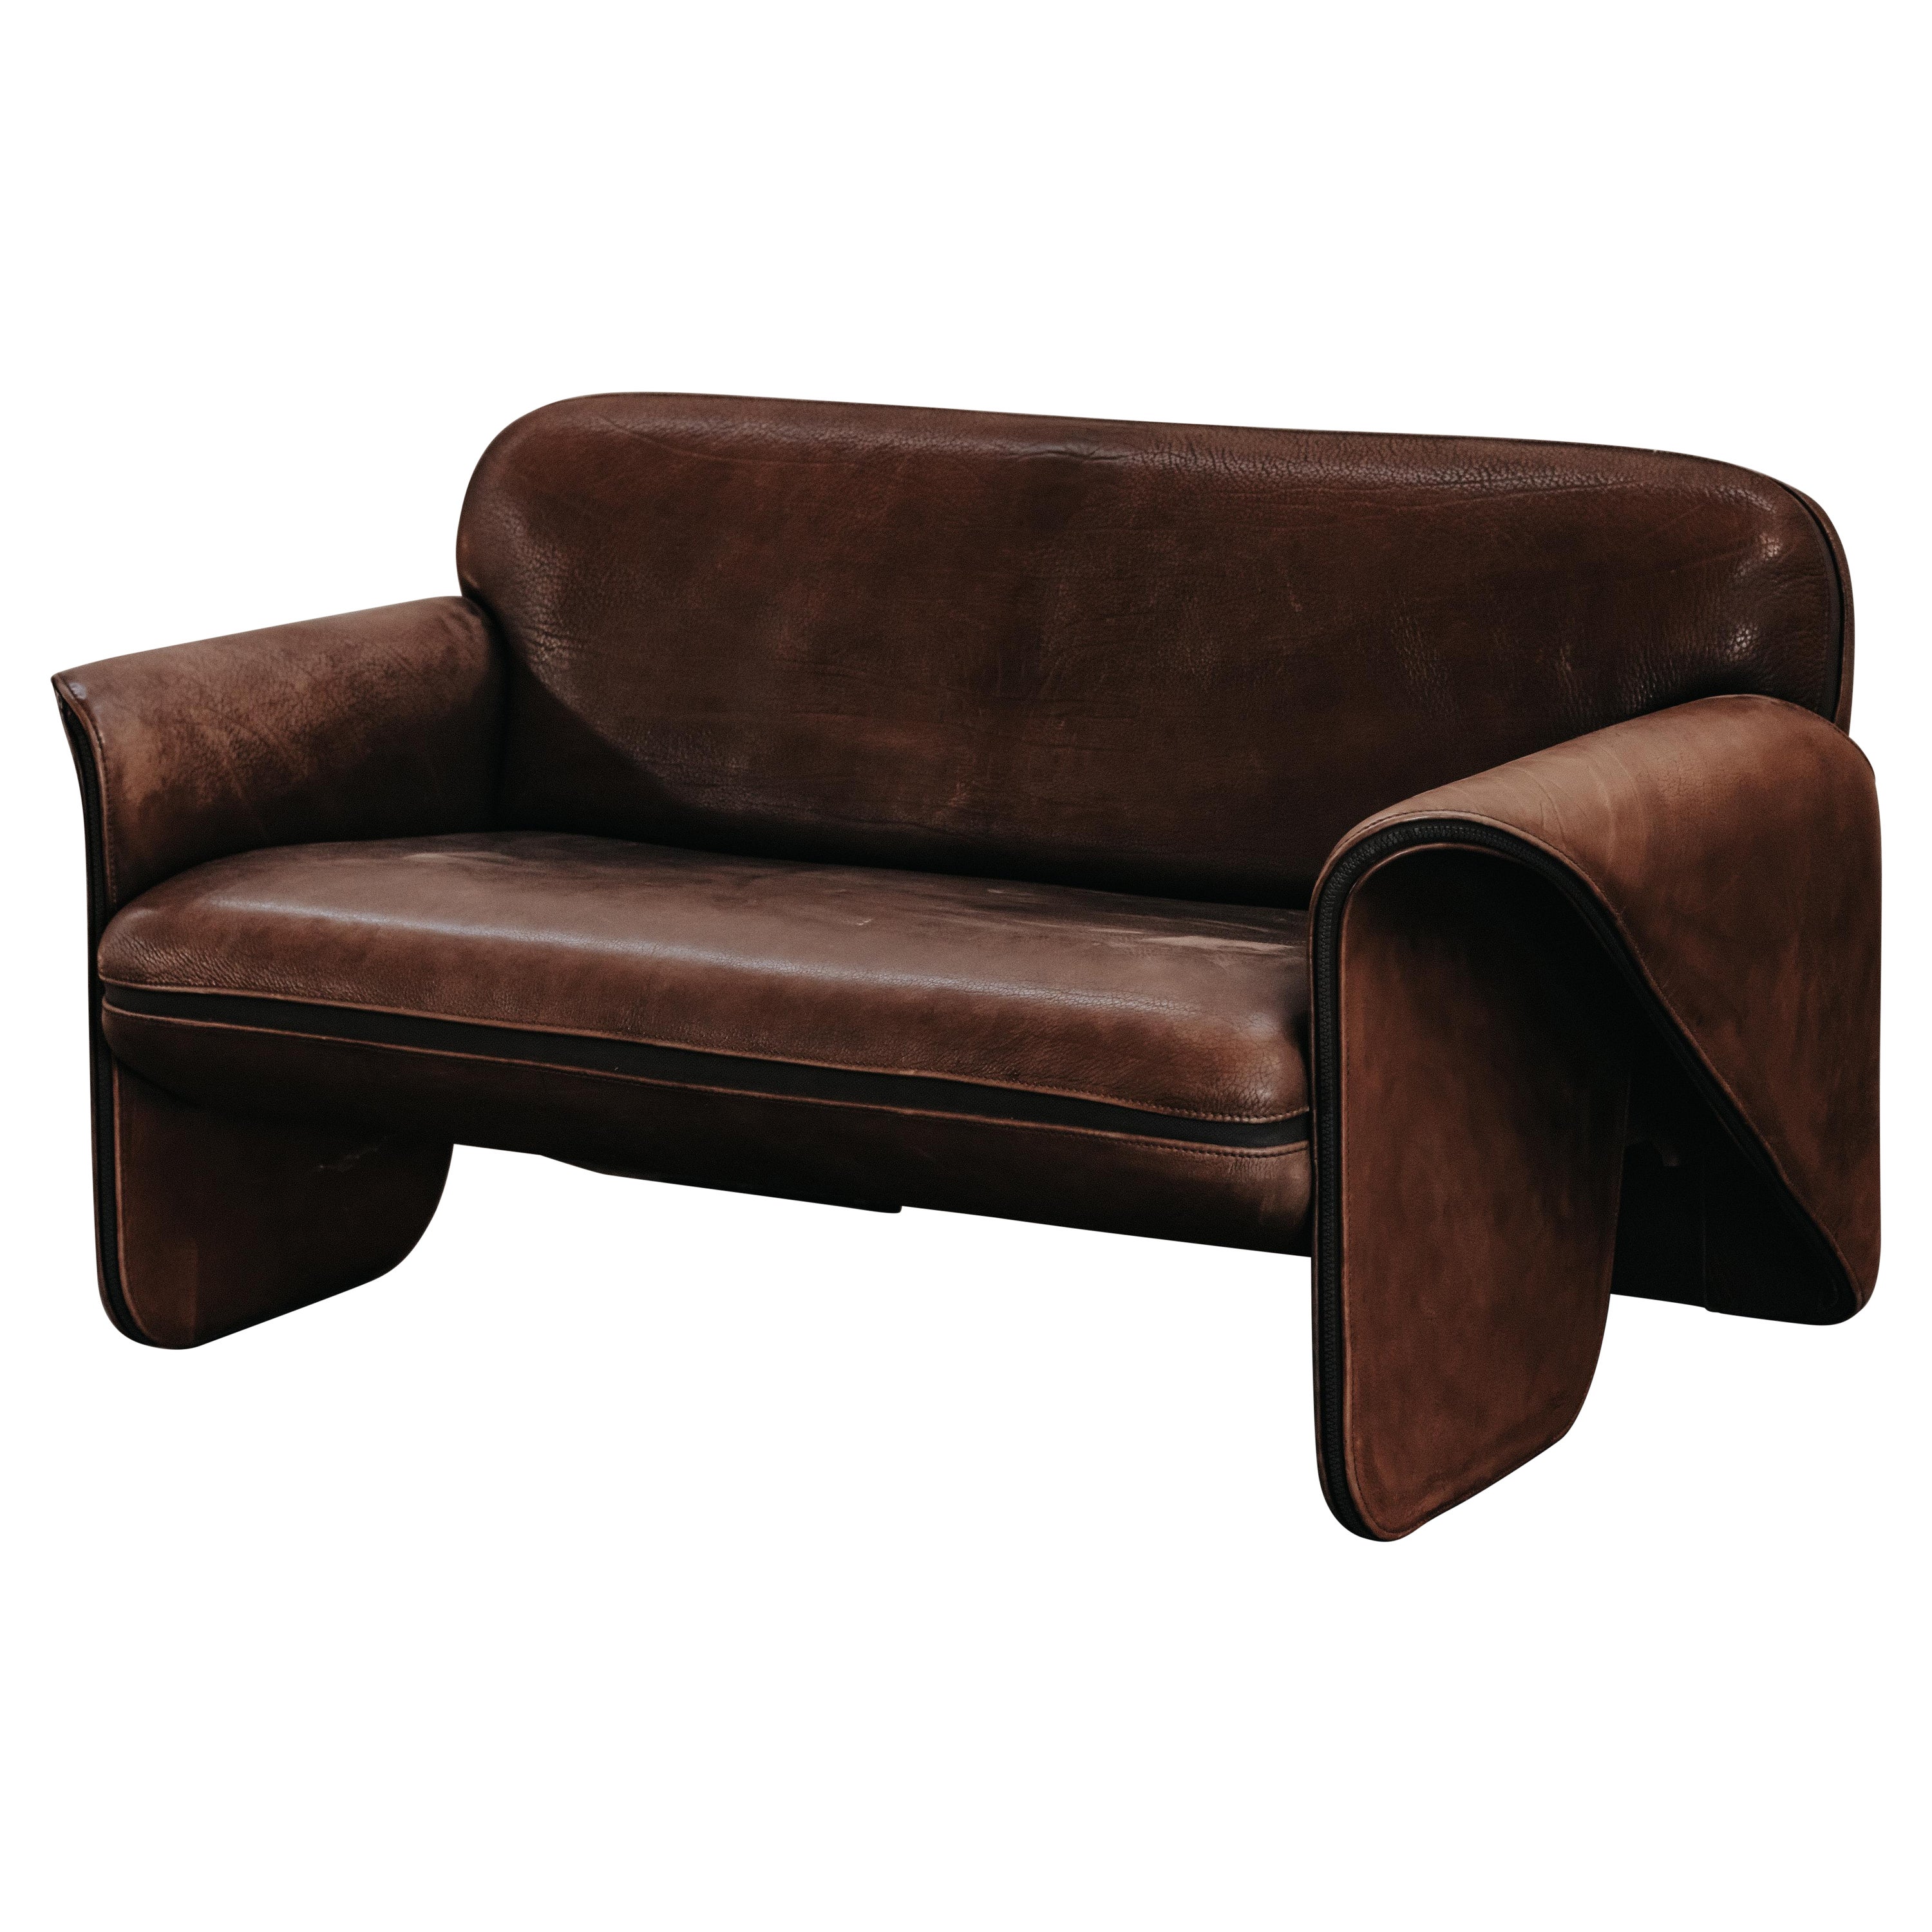 Vintage Brown Leather De Sede DS125 Sofa From Switzerland, Circa 1970